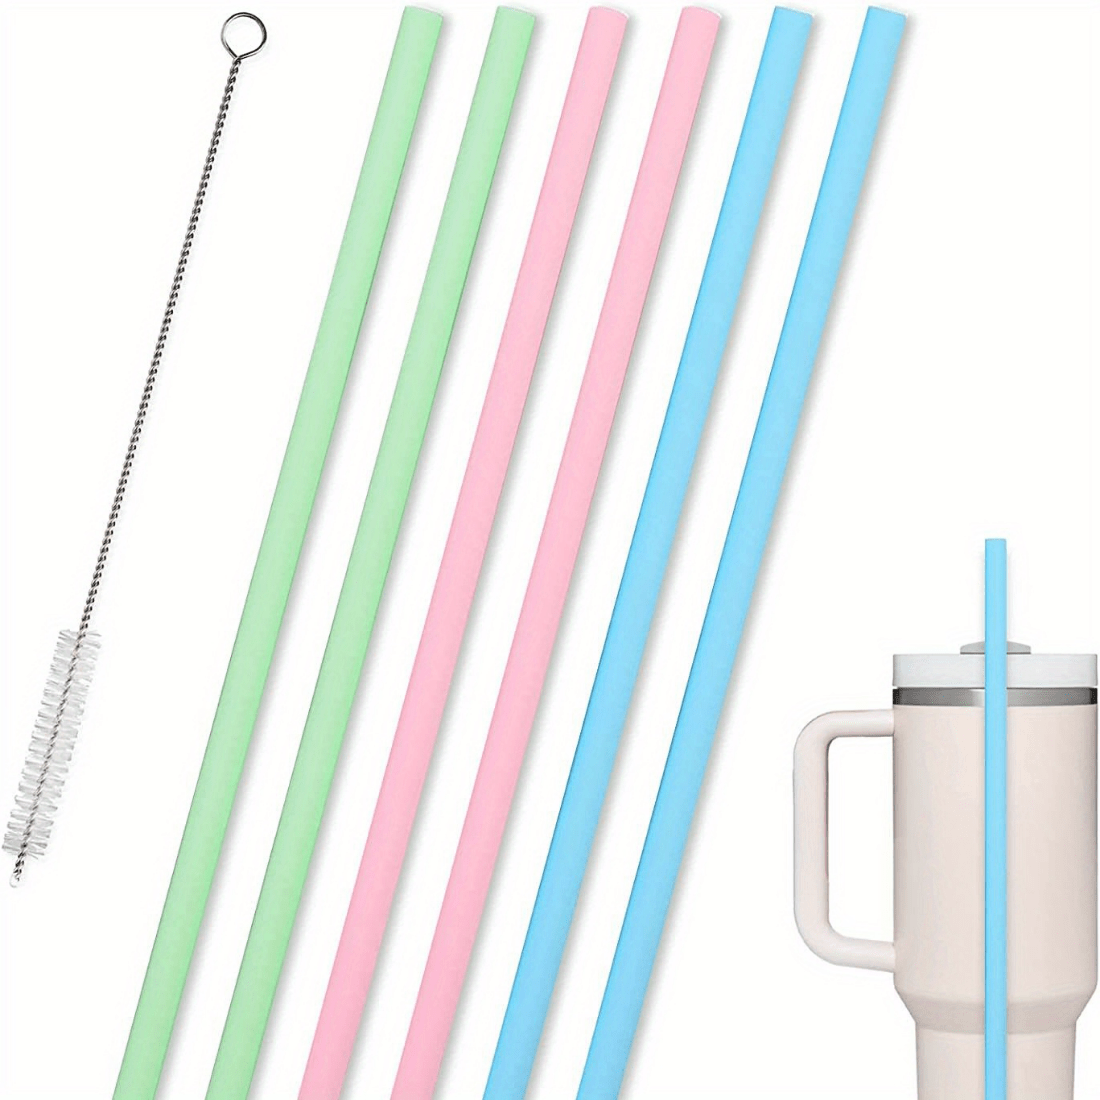 6pcs Straw Replacement for Stanley Cup Accessories, Reusable Straws for  Stanley 40 oz 30 oz and